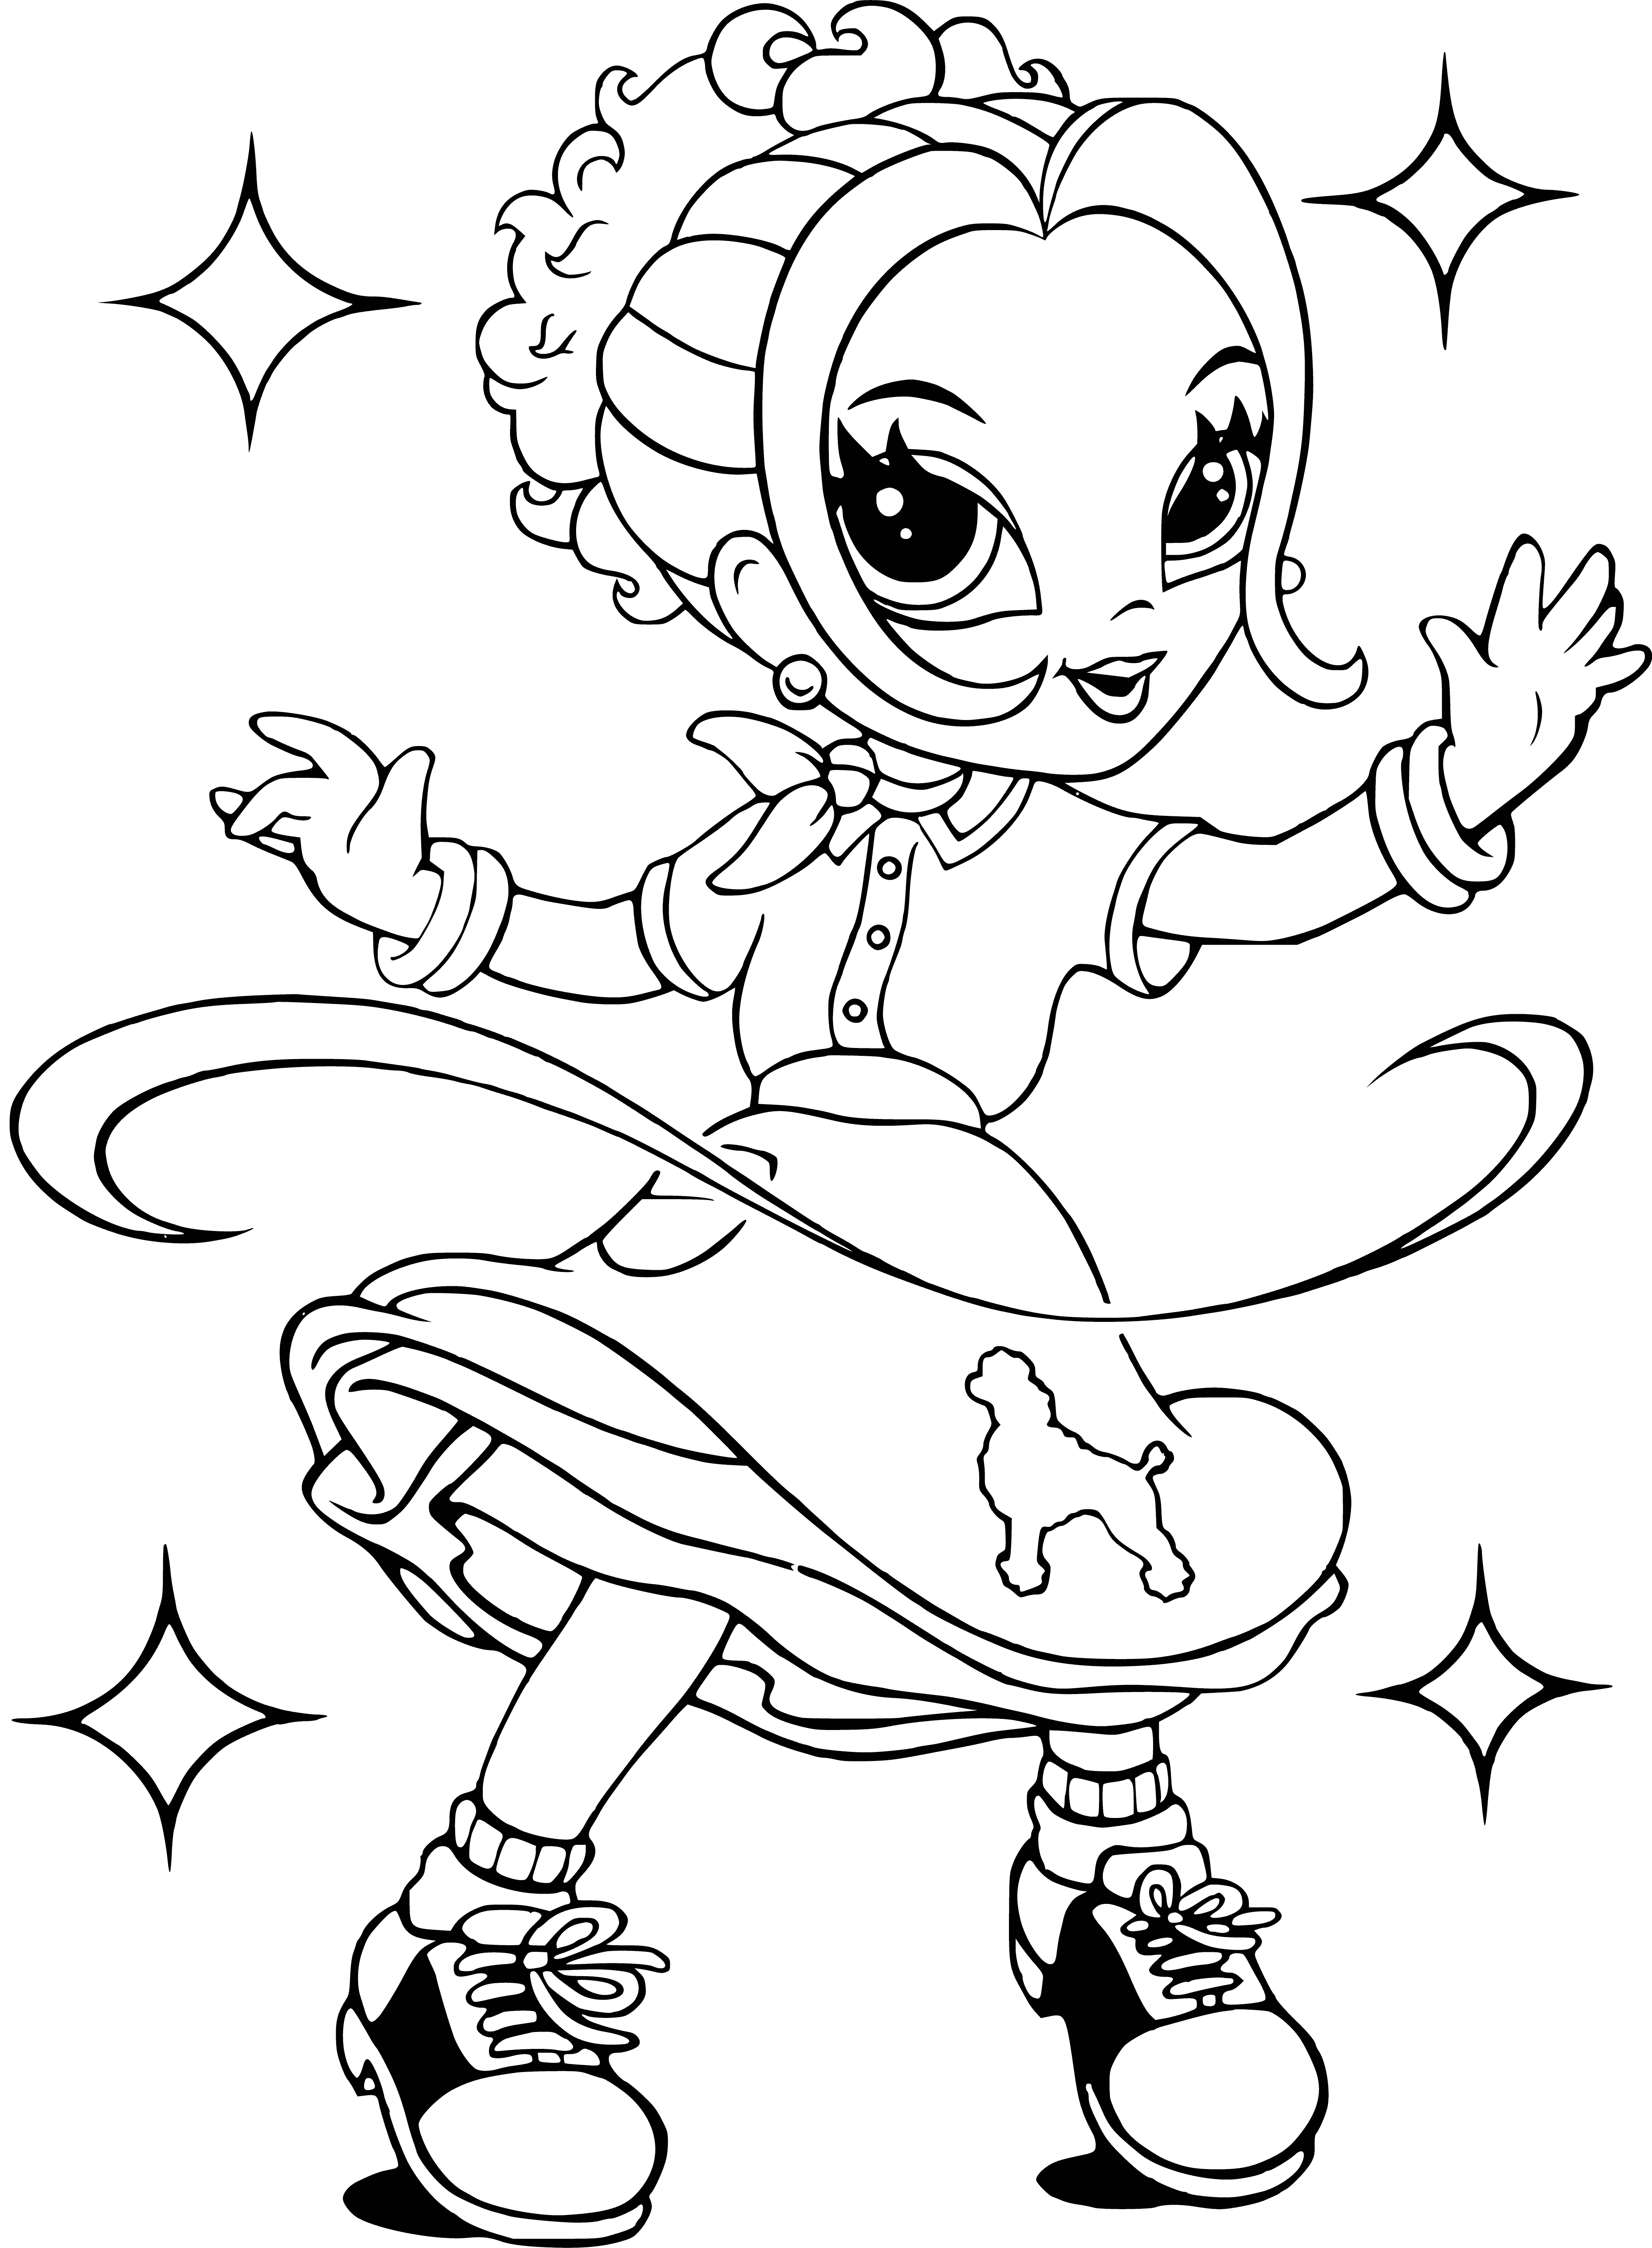 coloring page: Glam girl in pink dress, fur stole, pearl earrings, diamond necklace & pink purse. Ready to be colored! #coloringpages